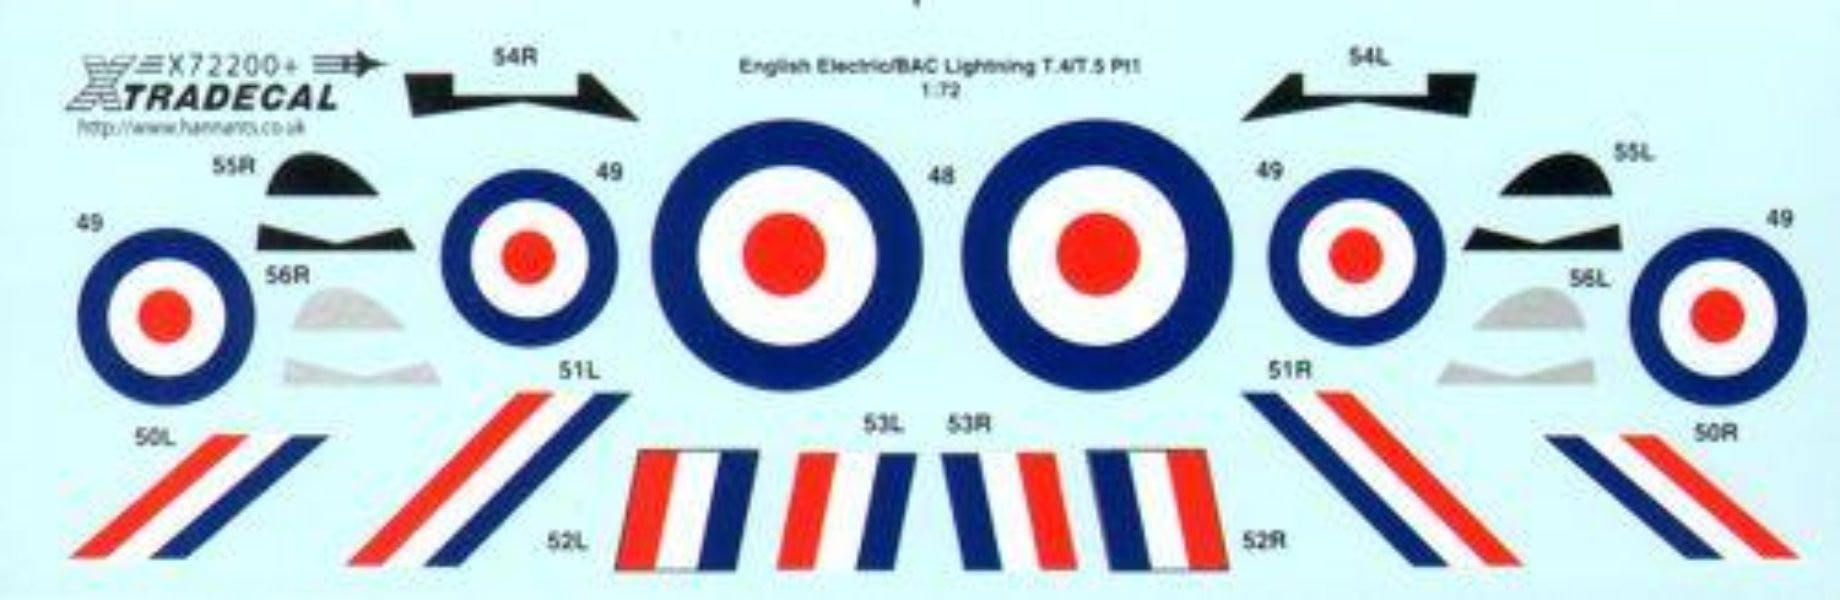 Xtradecal X72200 1/72 BAC/EE Lightning T.4/T.5 Part 1 Model Decals - SGS Model Store